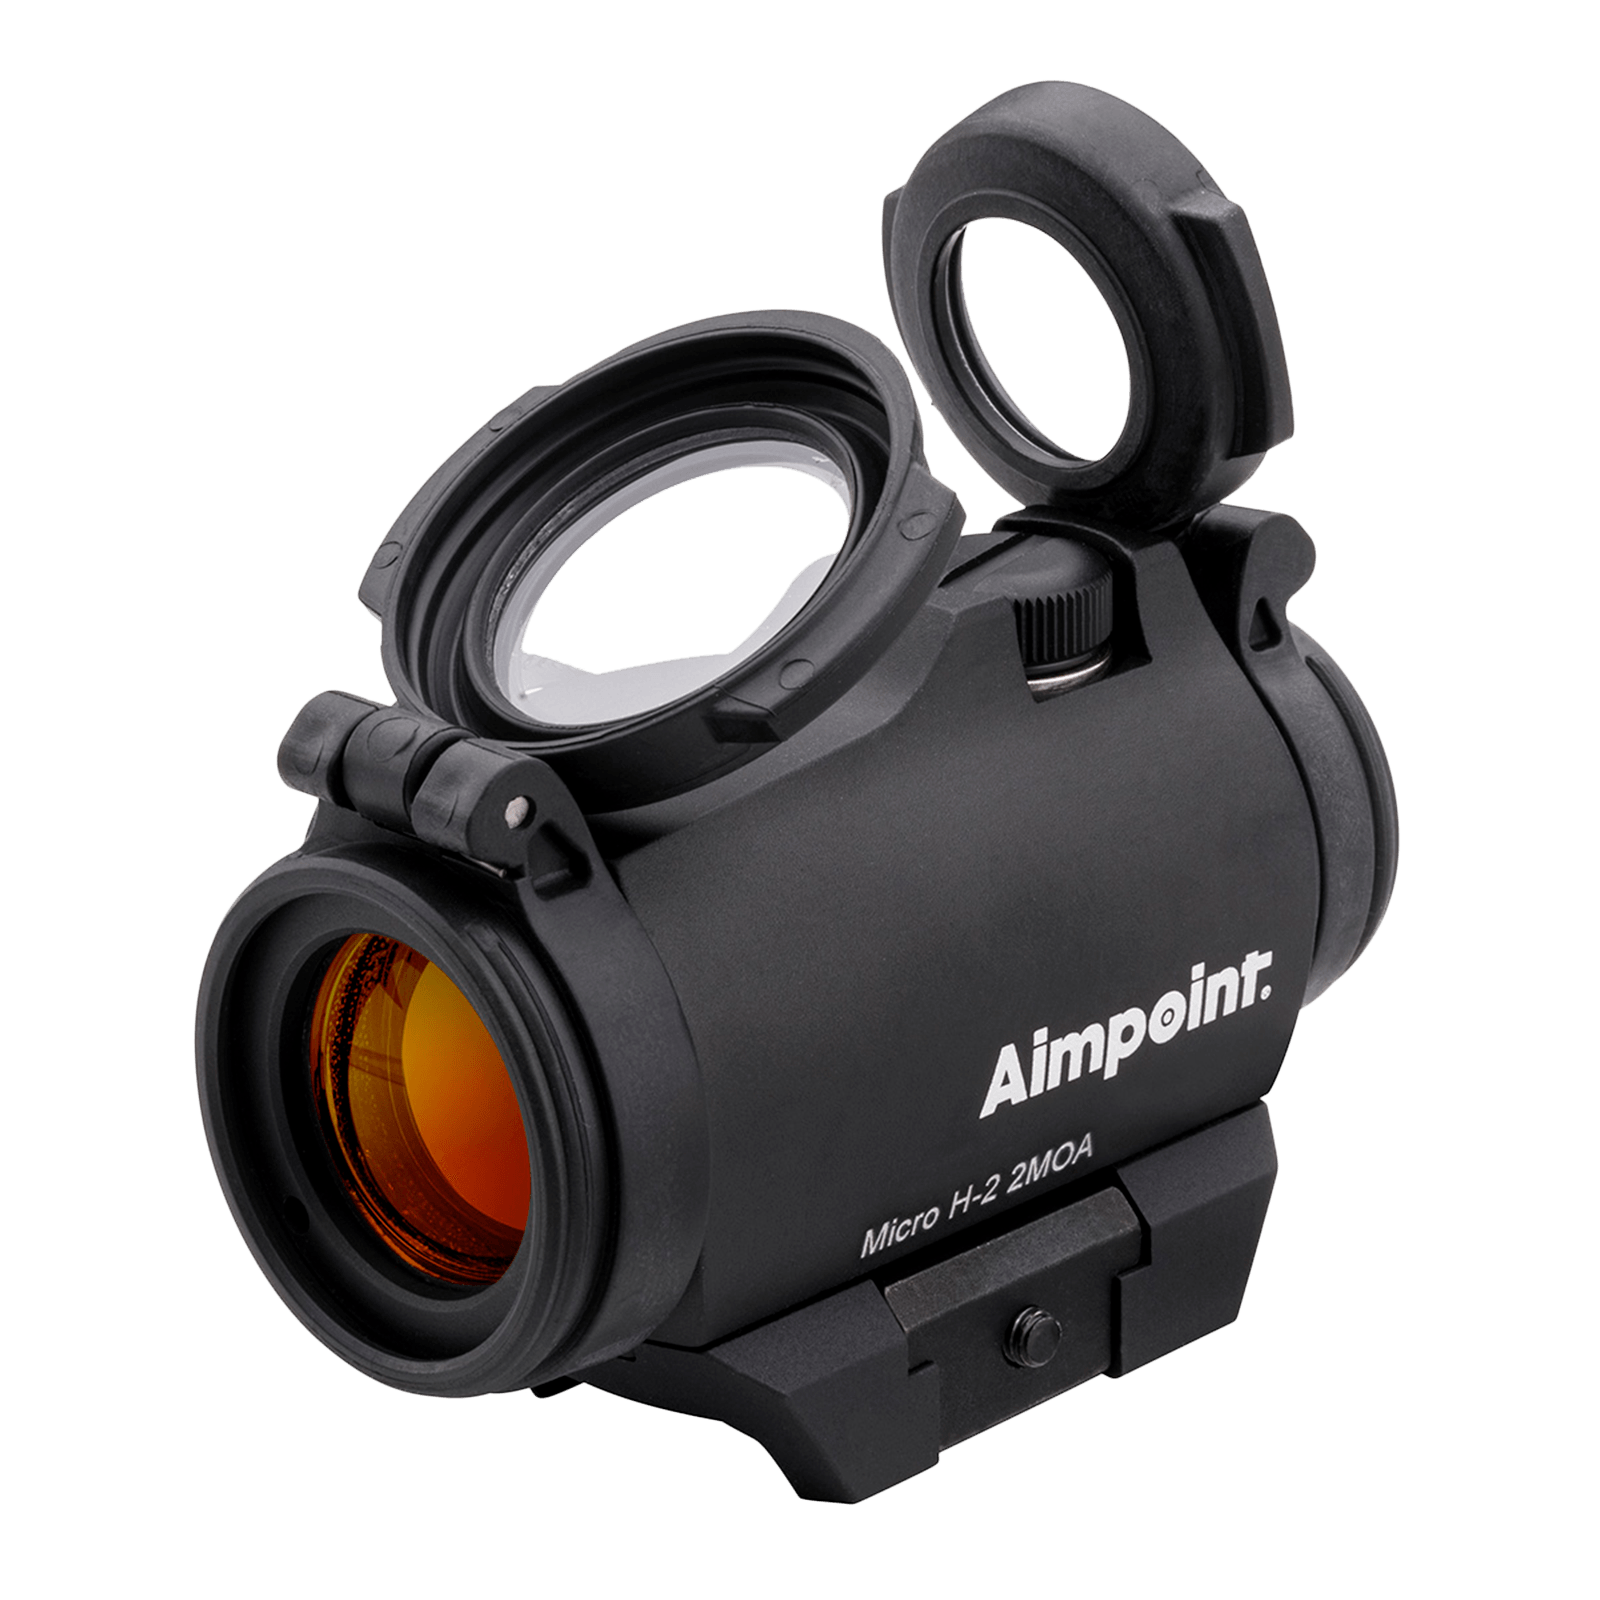 Aimpoint Micro H-2 2 Moa ACET